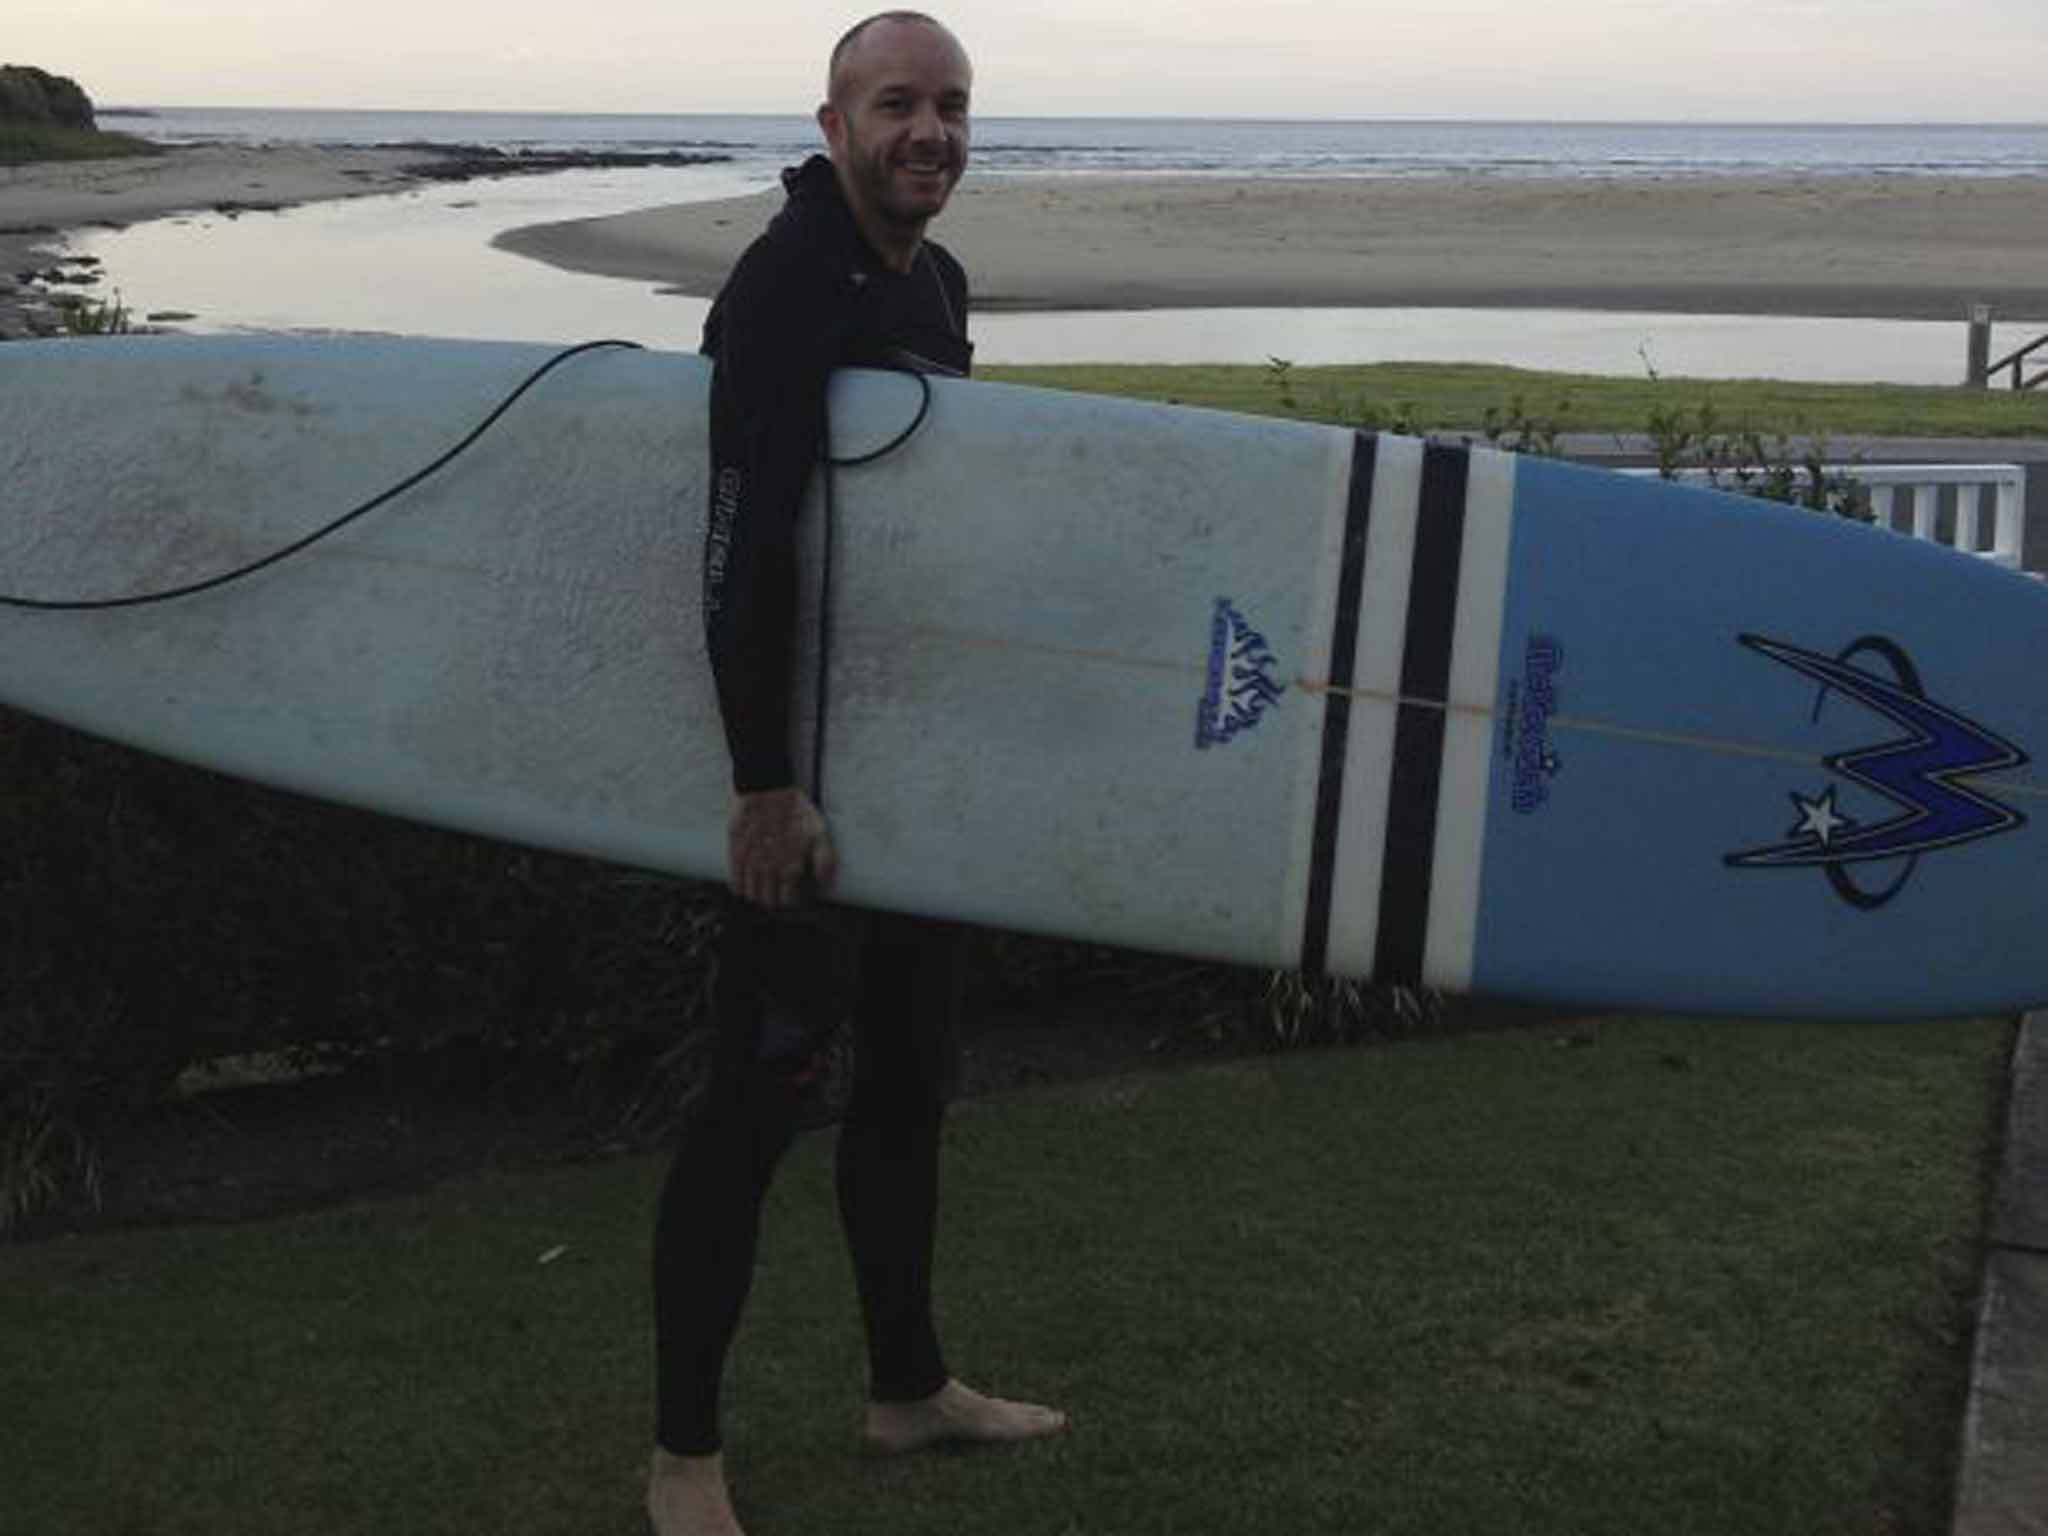 Surf's up: Matt Richell preparing to hit the waves - the pastime that would ultimately end his lifelong friendship with writer Saul Wordsworth